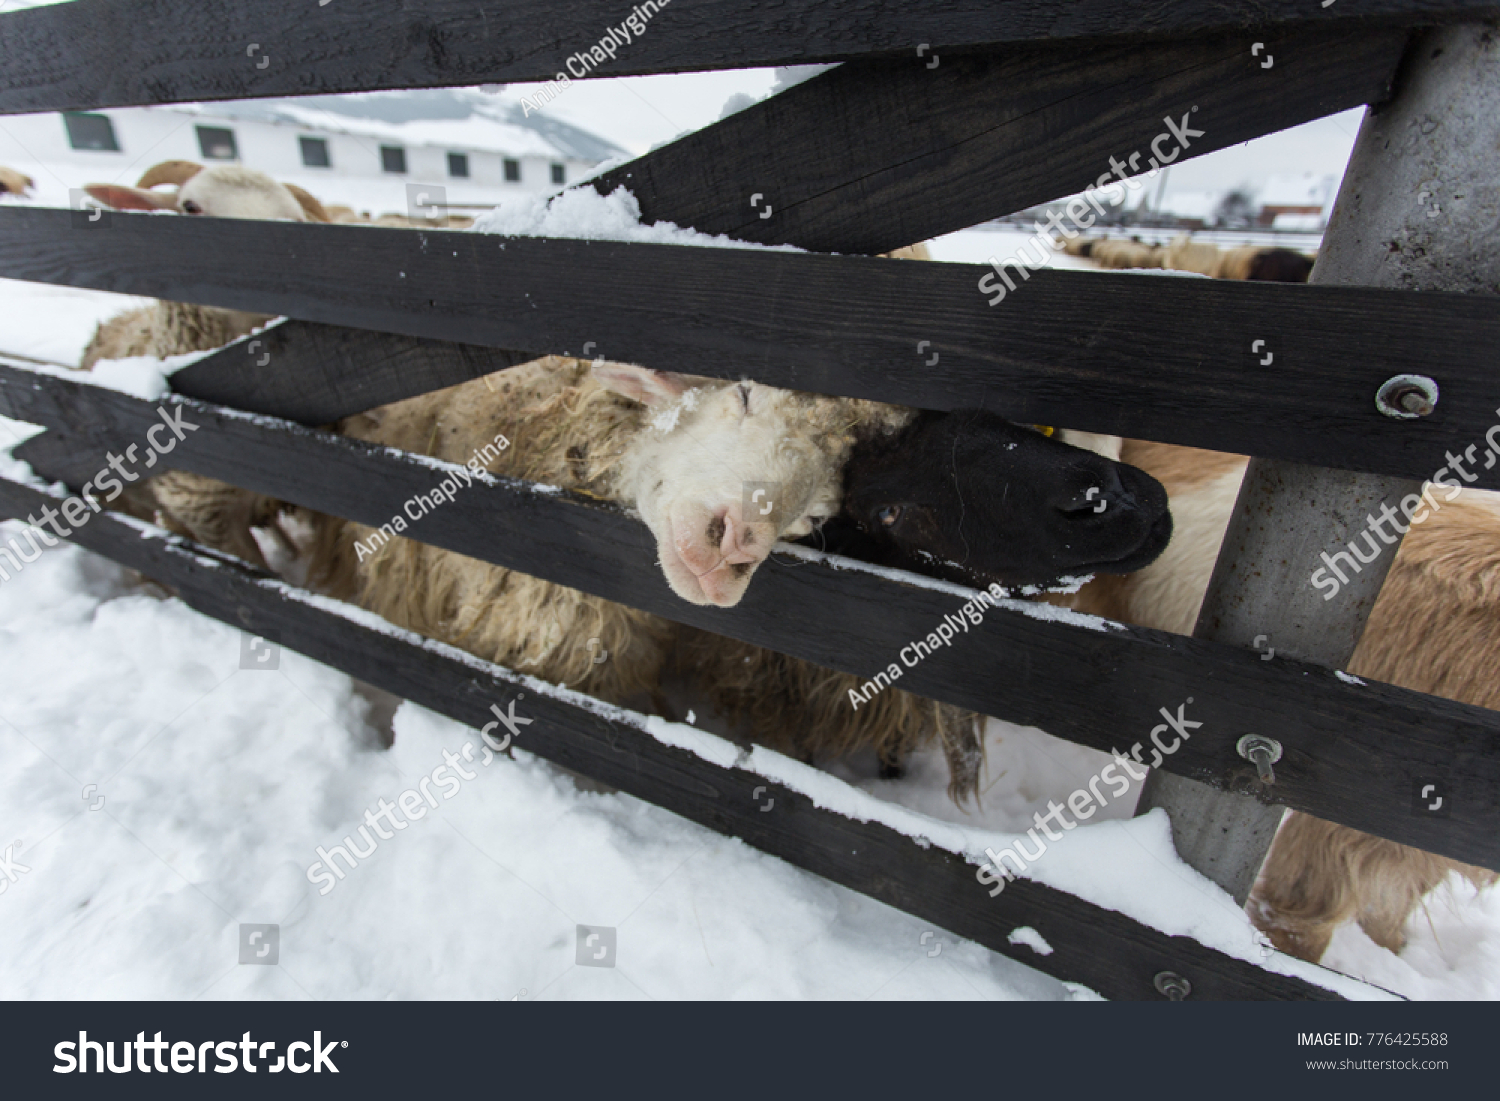 A herd of sheep on a farm on a winter day. A herd of sheep on a farm on a winter day. A sheep looks at the camera near the fence. #776425588